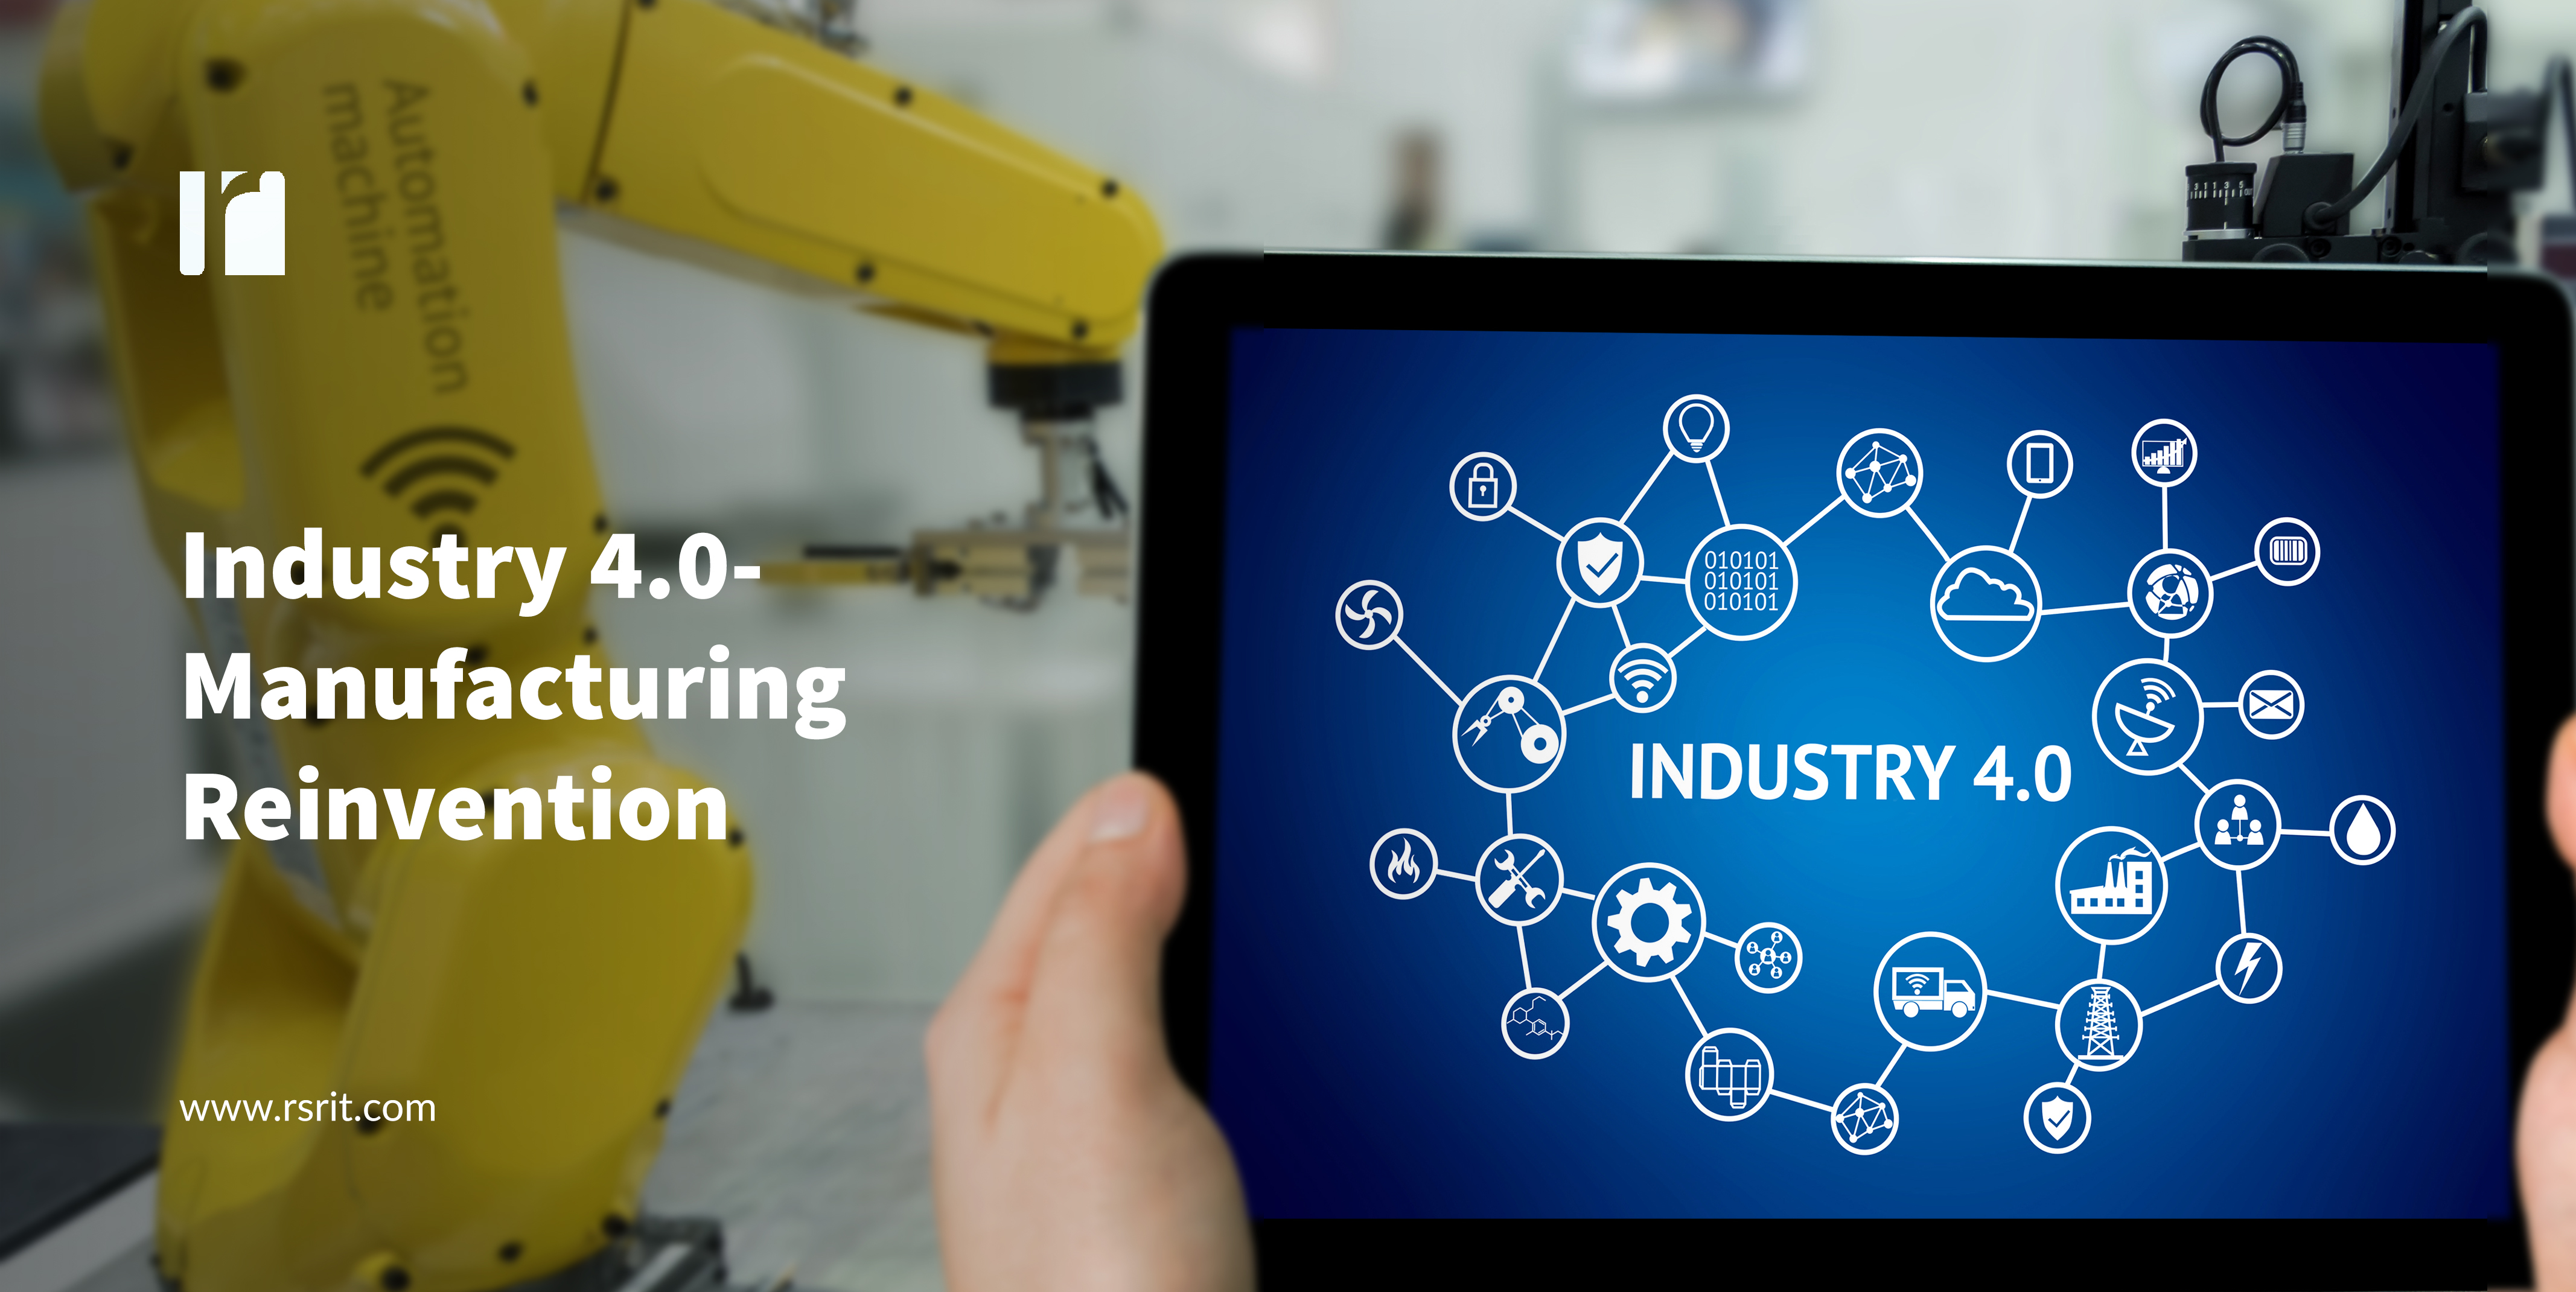 Industry 4.0—A Manufacturing Reinvention